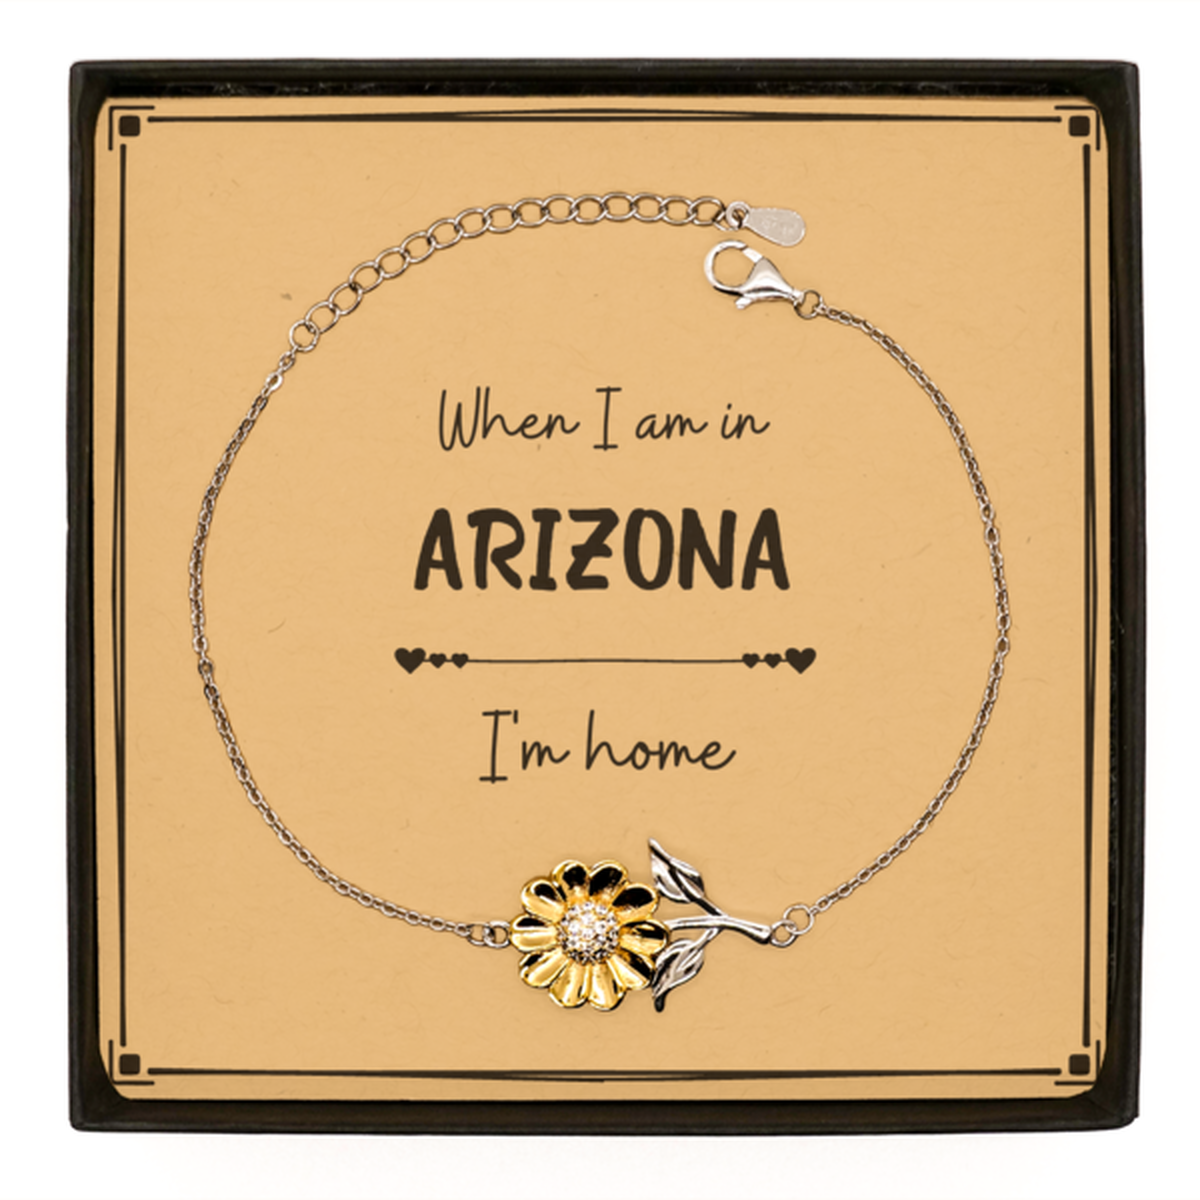 When I am in Arizona I'm home Sunflower Bracelet, Message Card Gifts For Arizona, State Arizona Birthday Gifts for Friends Coworker